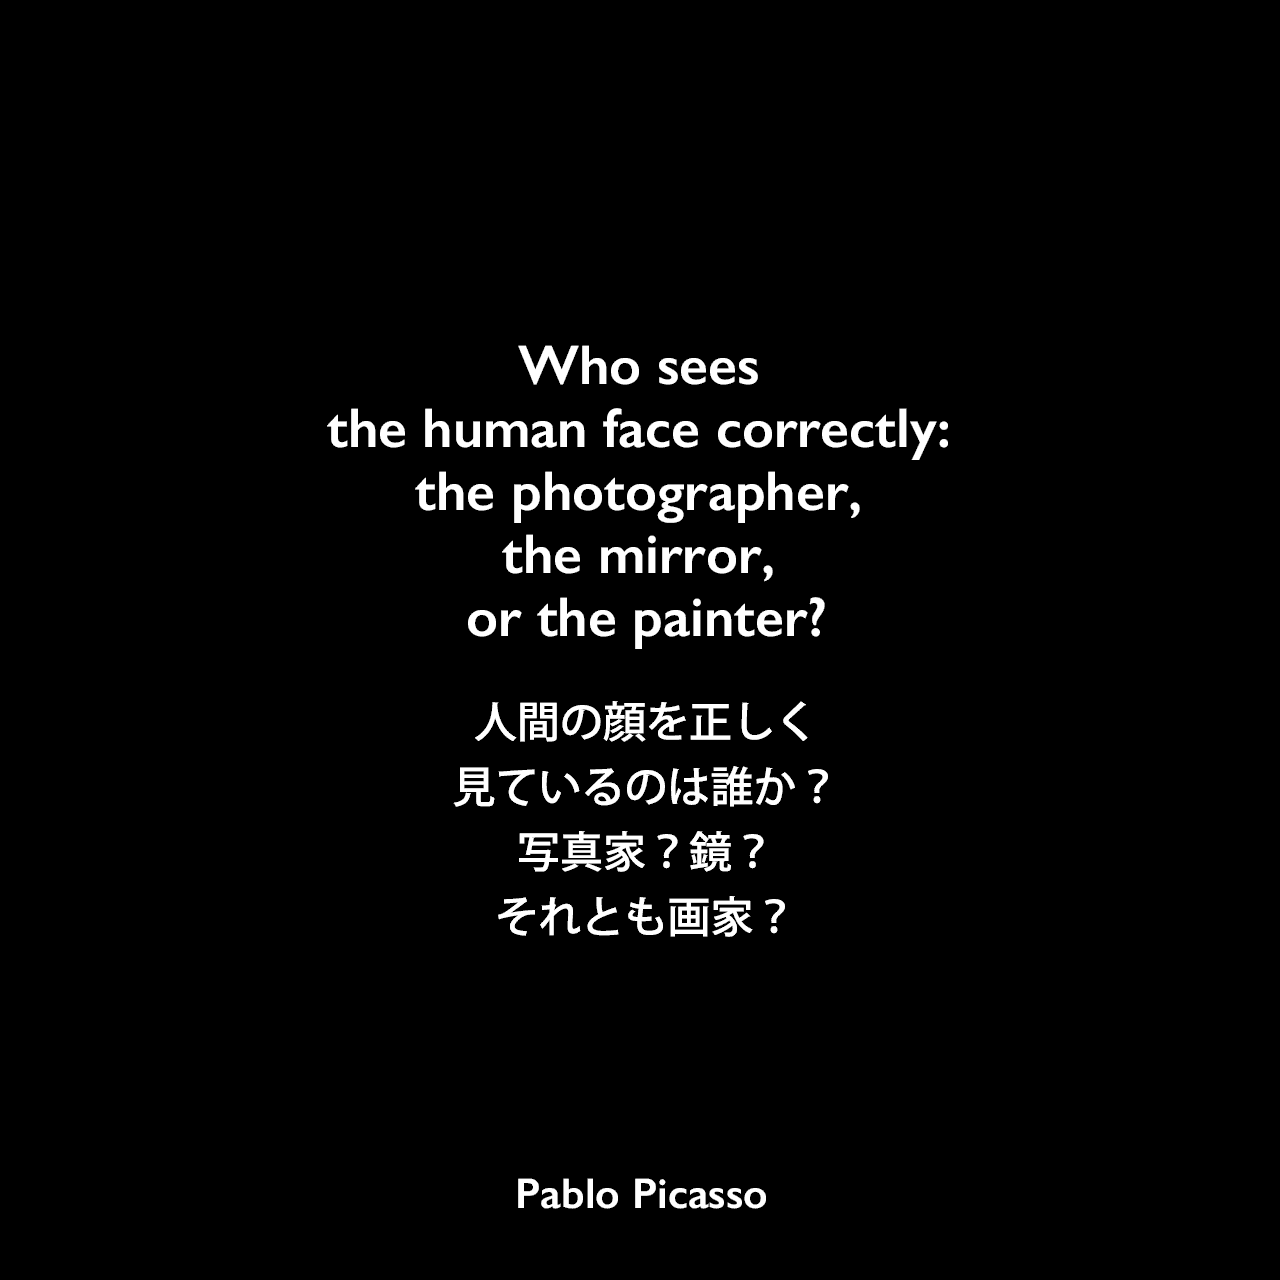 Who sees the human face correctly: the photographer, the mirror, or the painter?人間の顔を正しく見ているのは誰か？写真家？鏡？それとも画家？Pablo Picasso